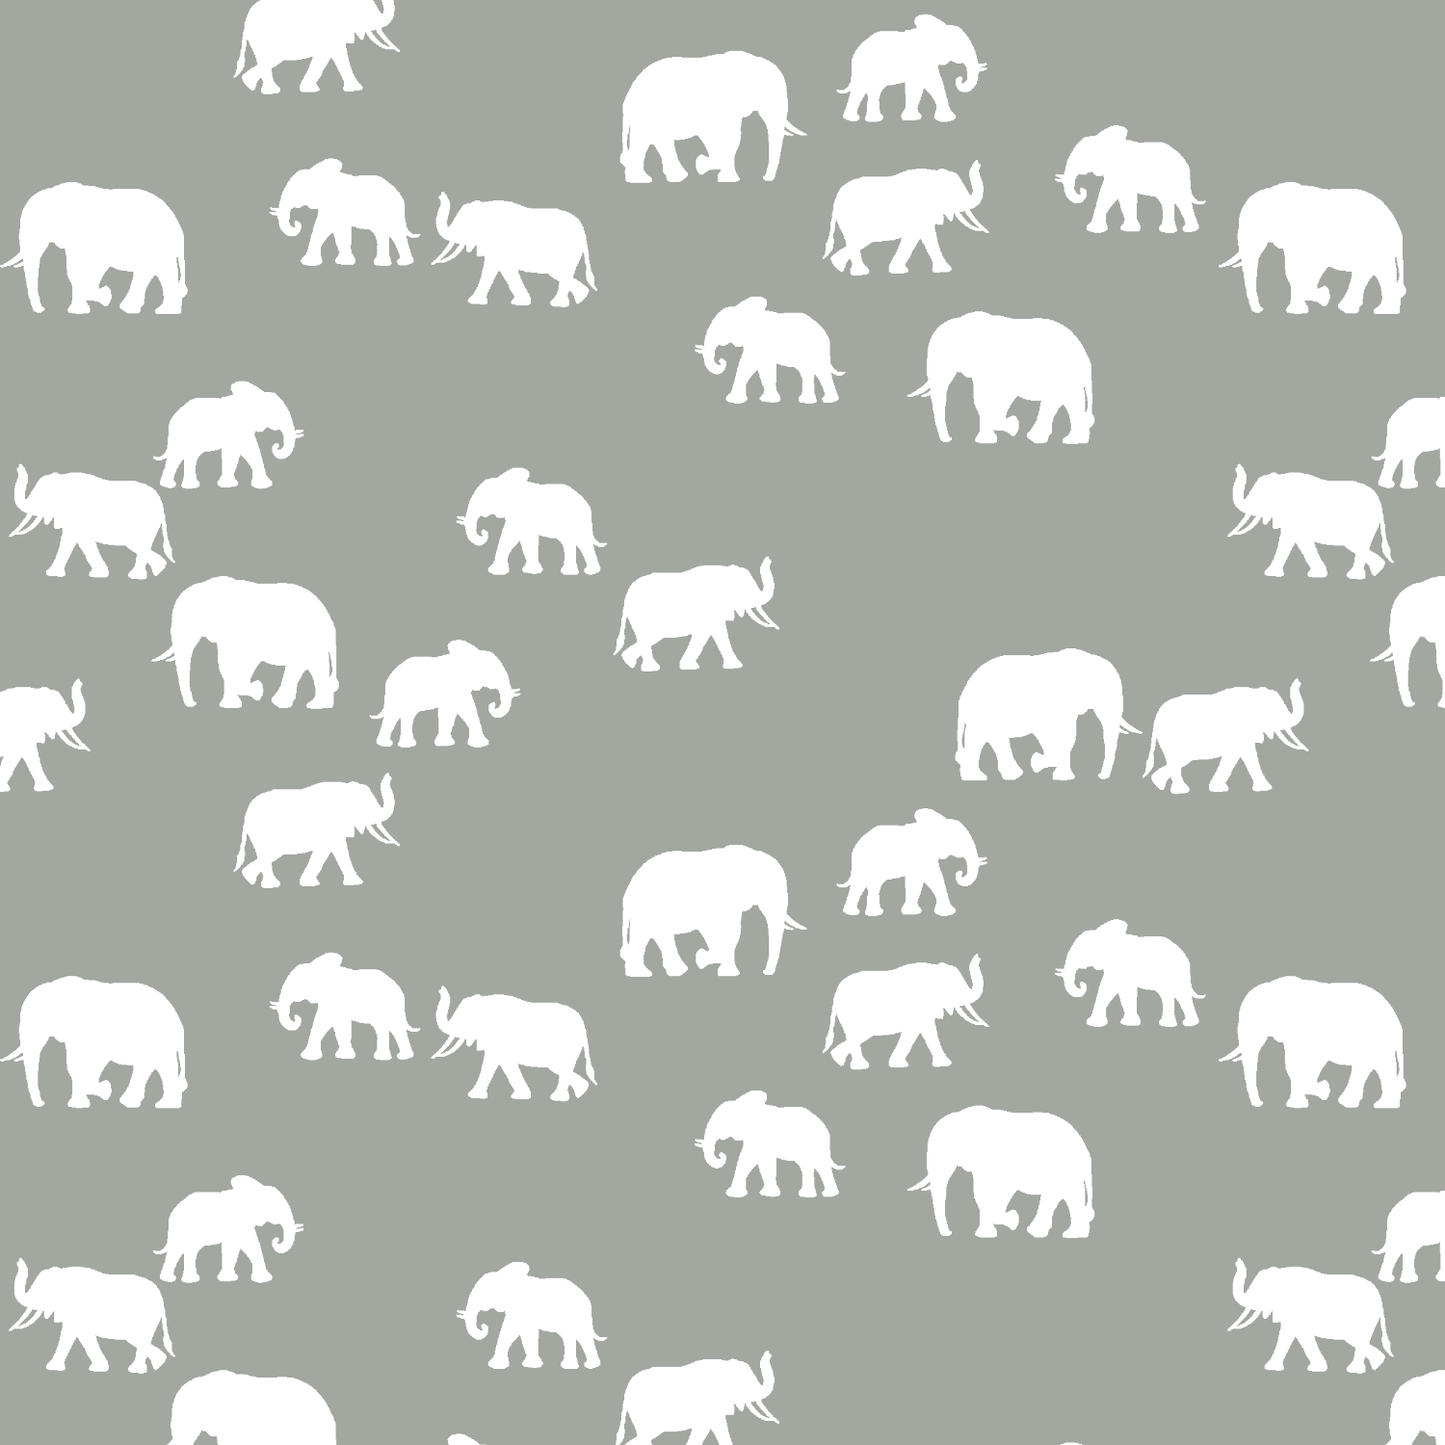 Elephant Silhouette in Sage